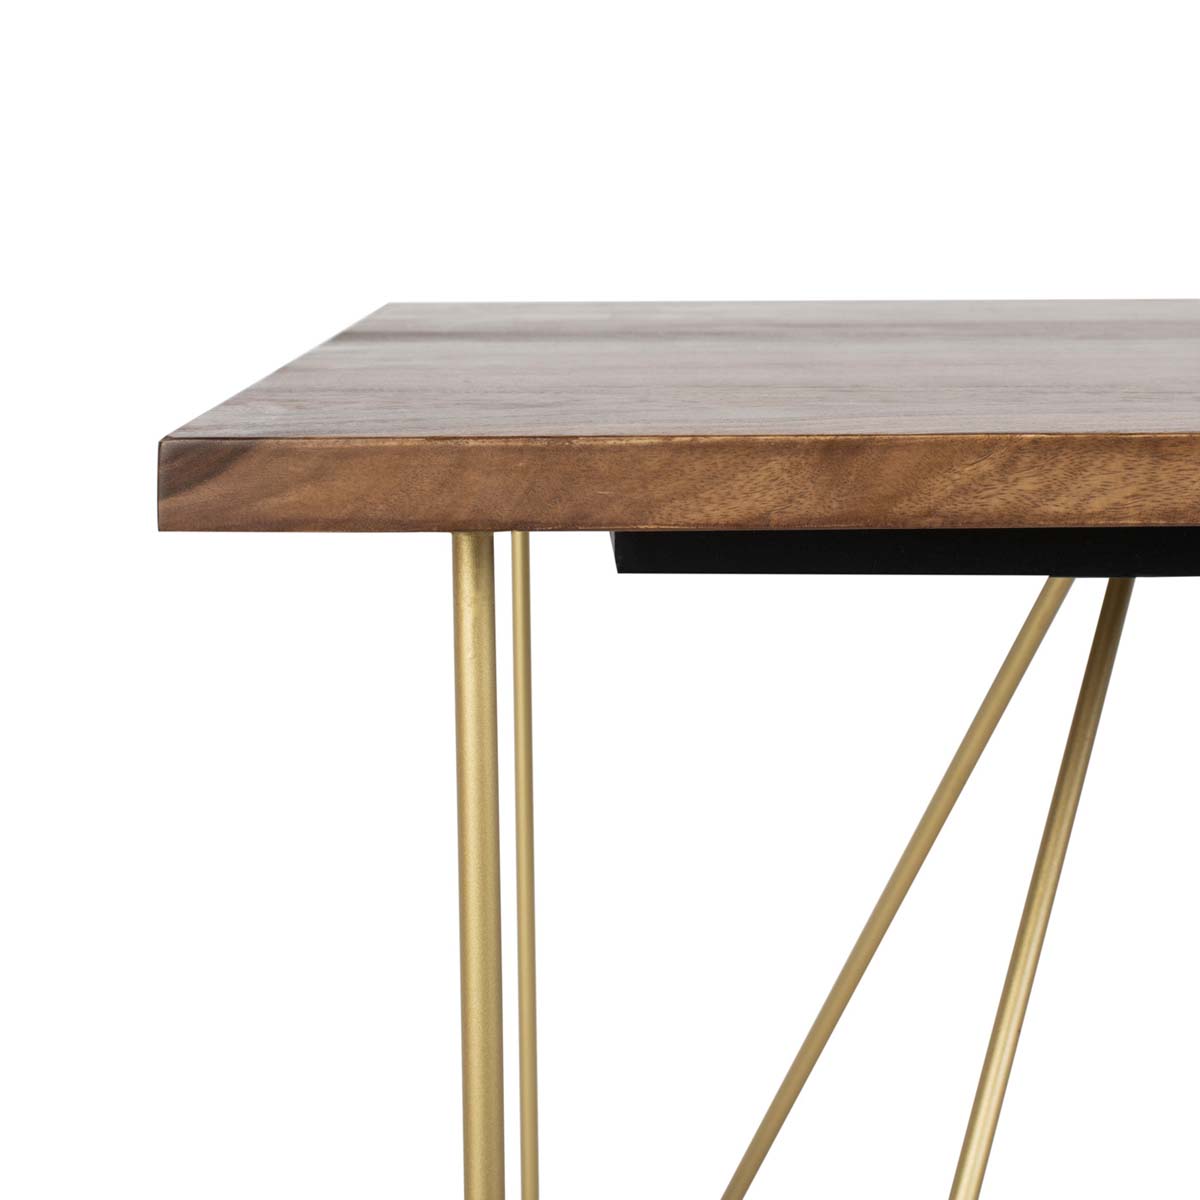 Safavieh Couture Captain Hairpin Legs Wood Dining Table - Walnut / Brass